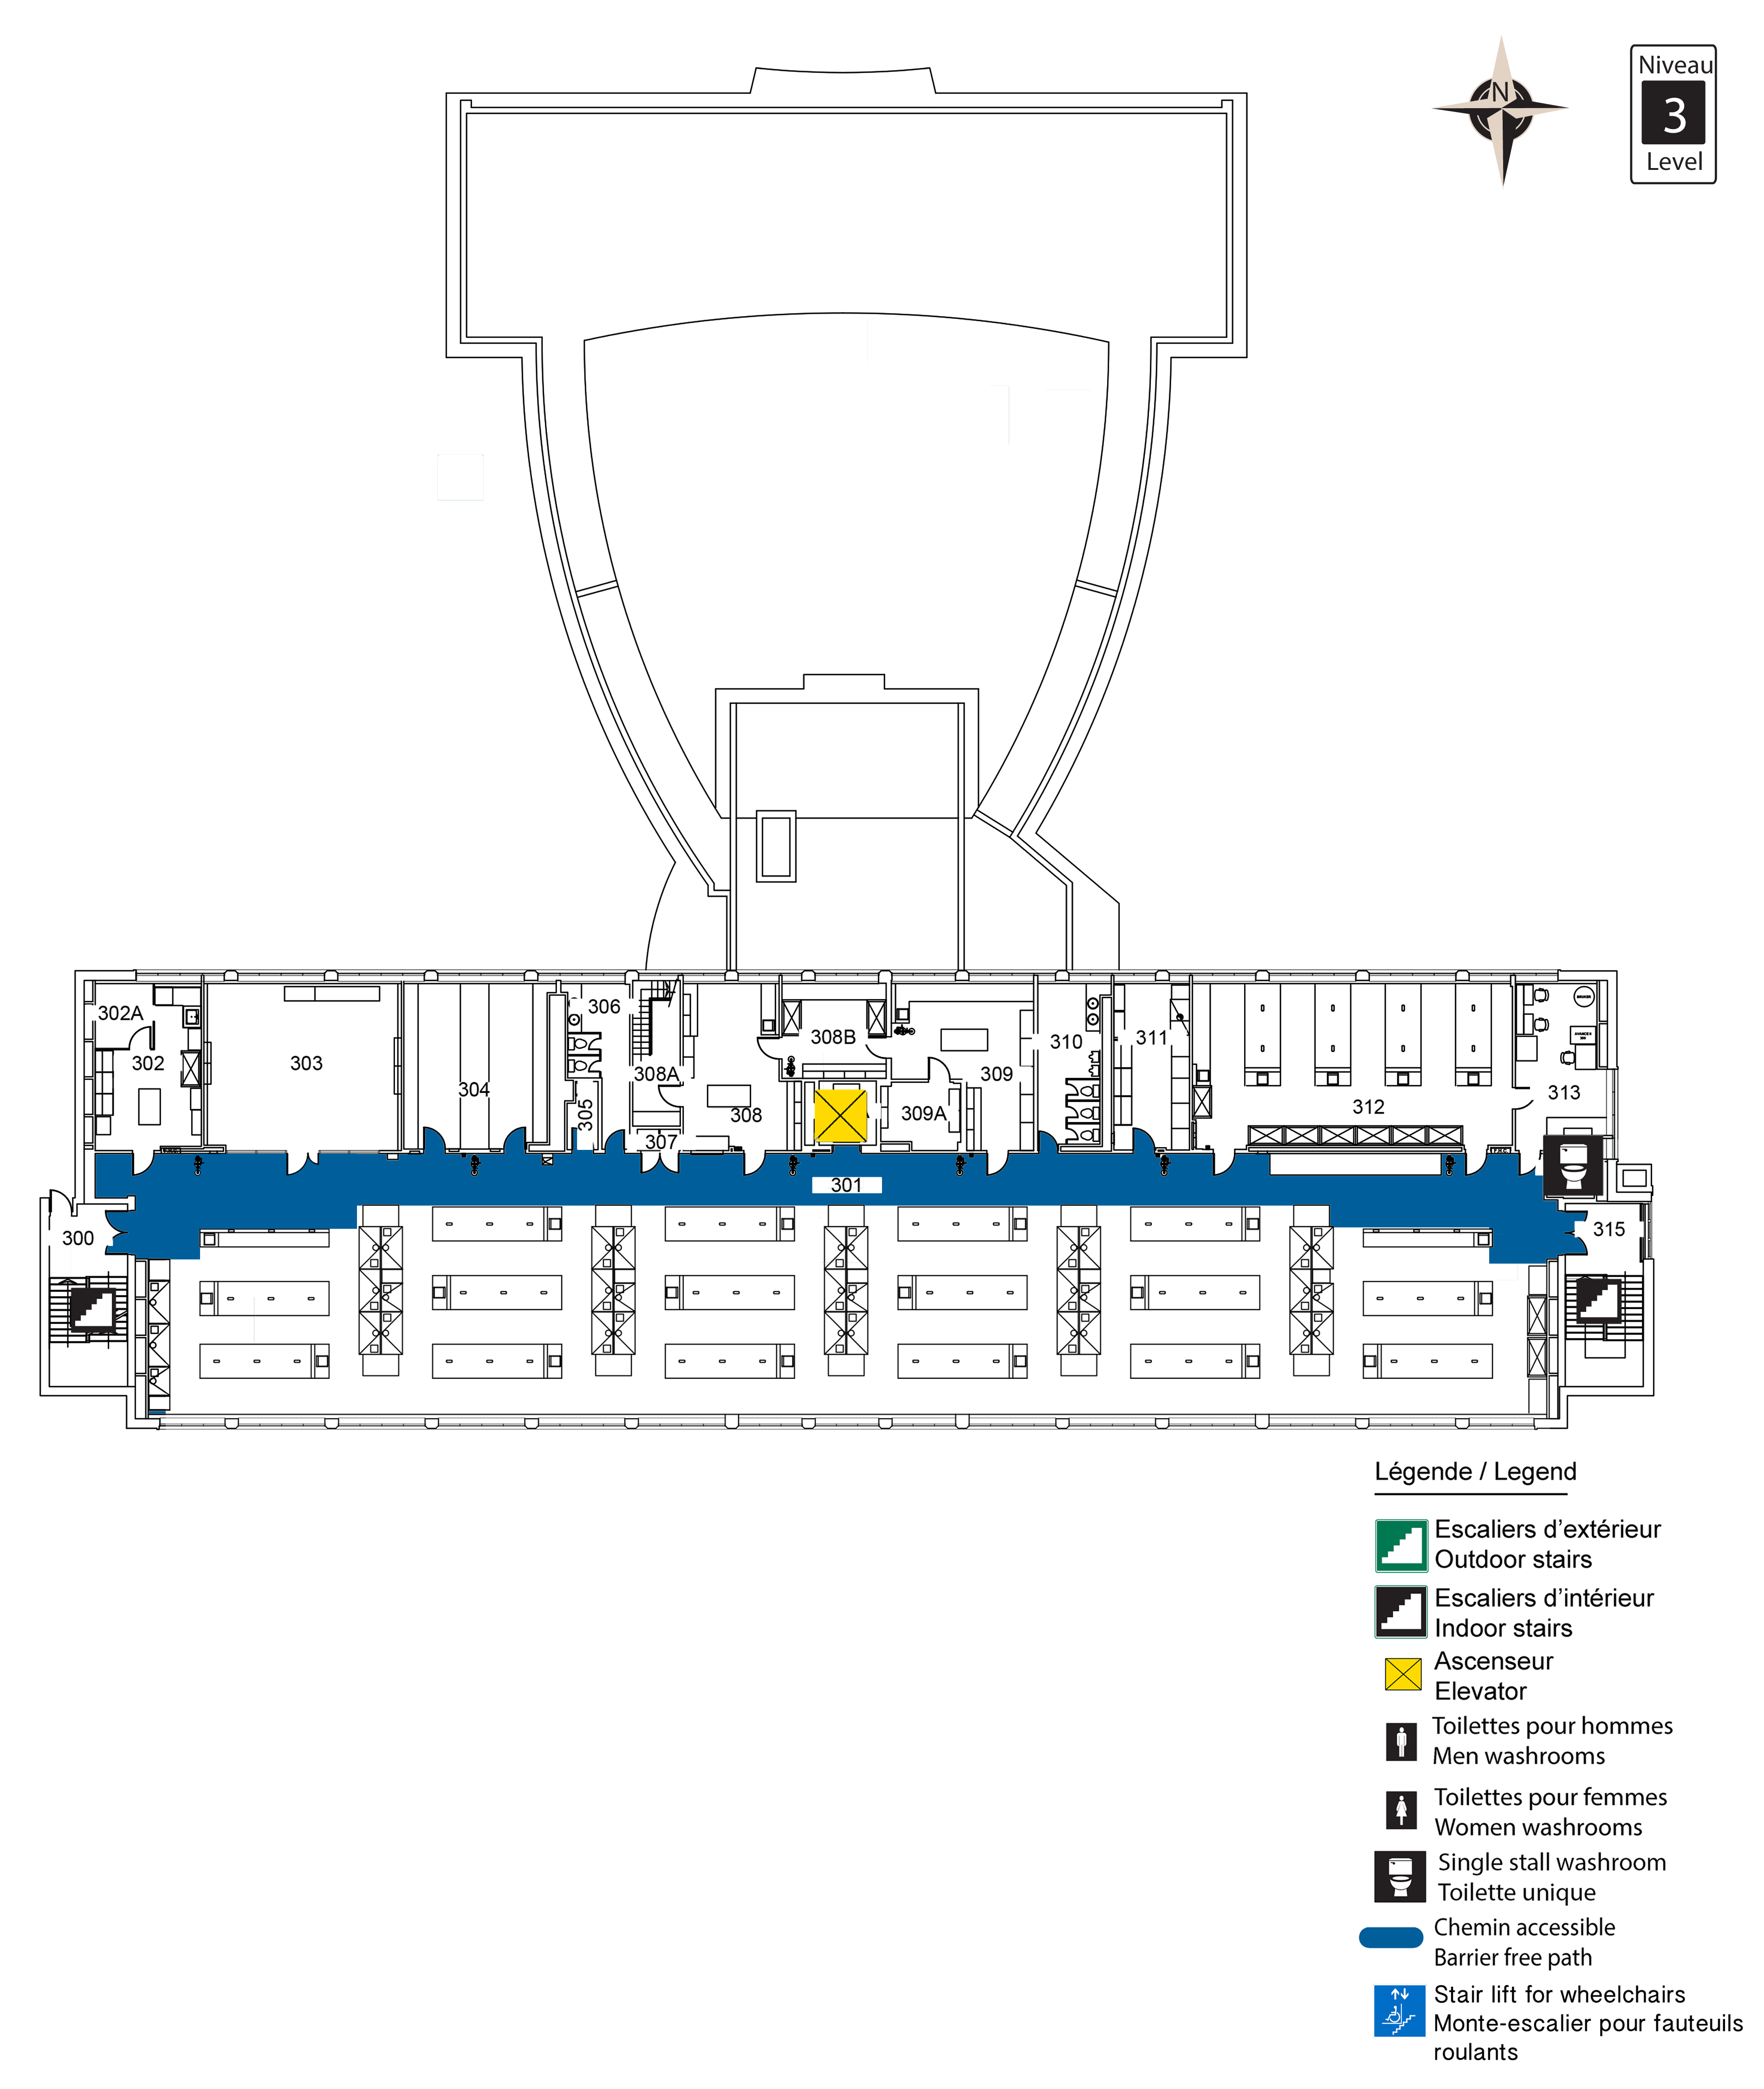 Accessible map - MRN level 3